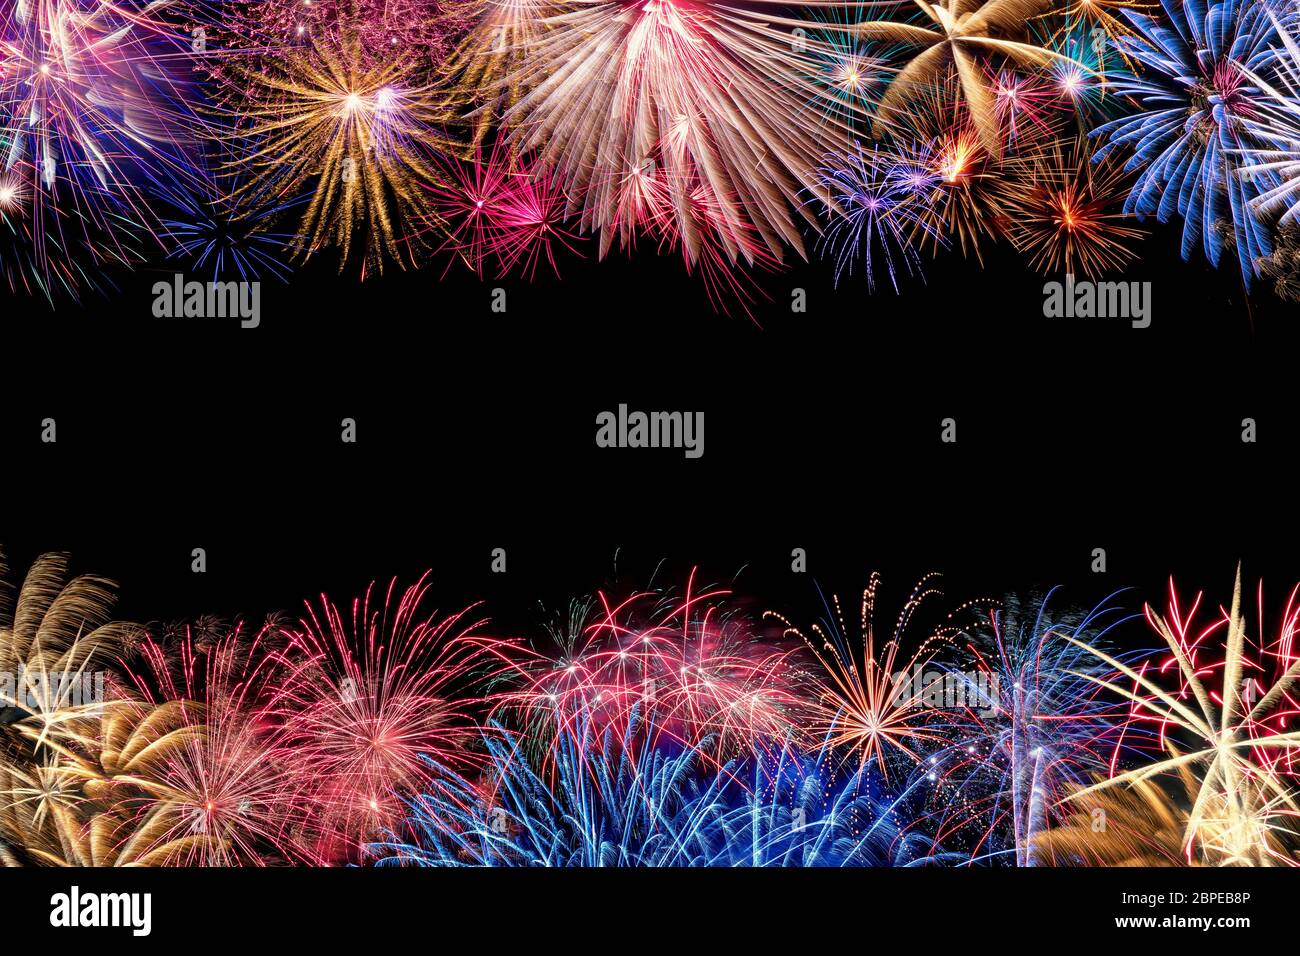 A very colorful border of different fireworks with copyspace in the middle of the image. Stock Photo